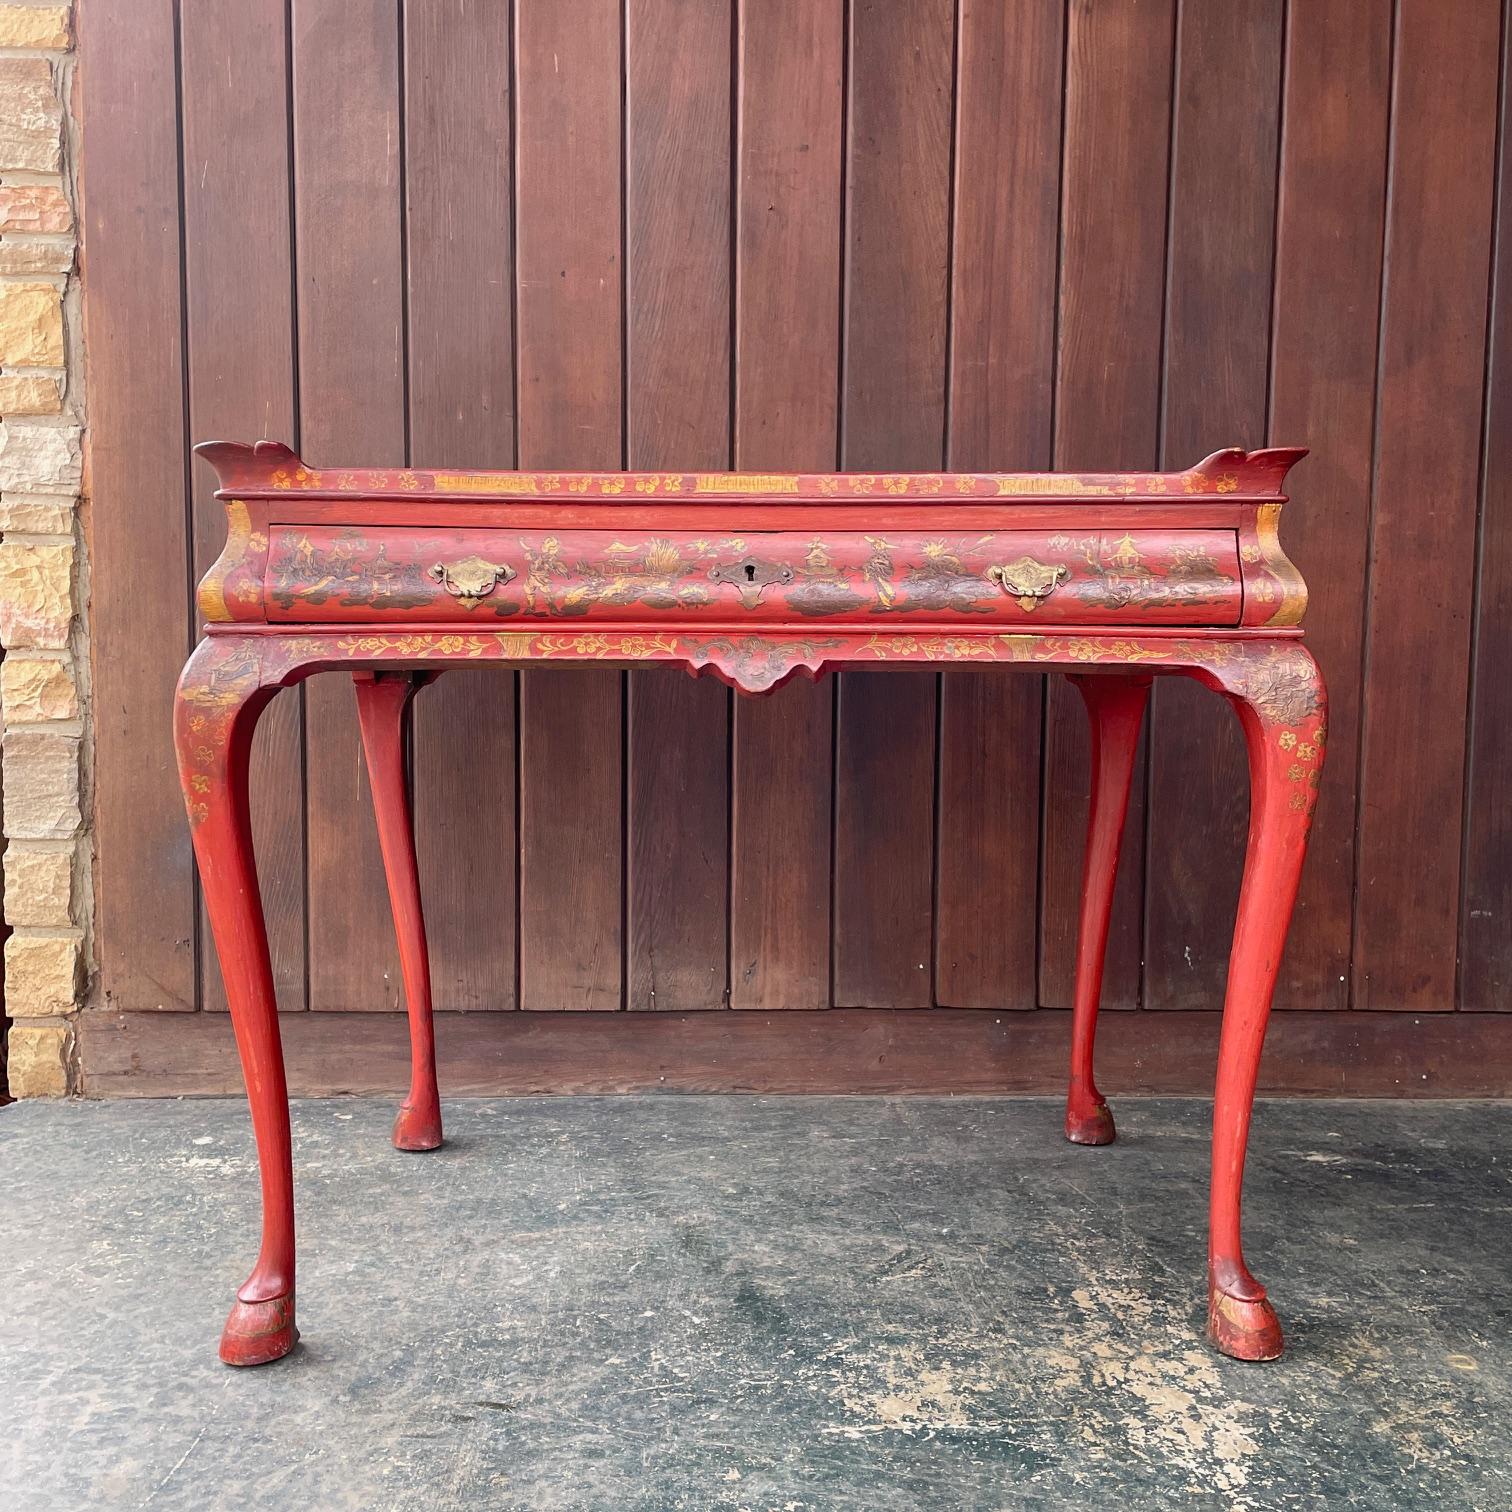 19th Century English Queen Anne Red Lacquered Chinoiserie Desk, No key. Draw is working smoothly. Produced in England or North America, but the exact origin is unknown to us.

W 35.5 x D 23 x H 29.5 in
H 23 in (Floor to Table Skirt)
